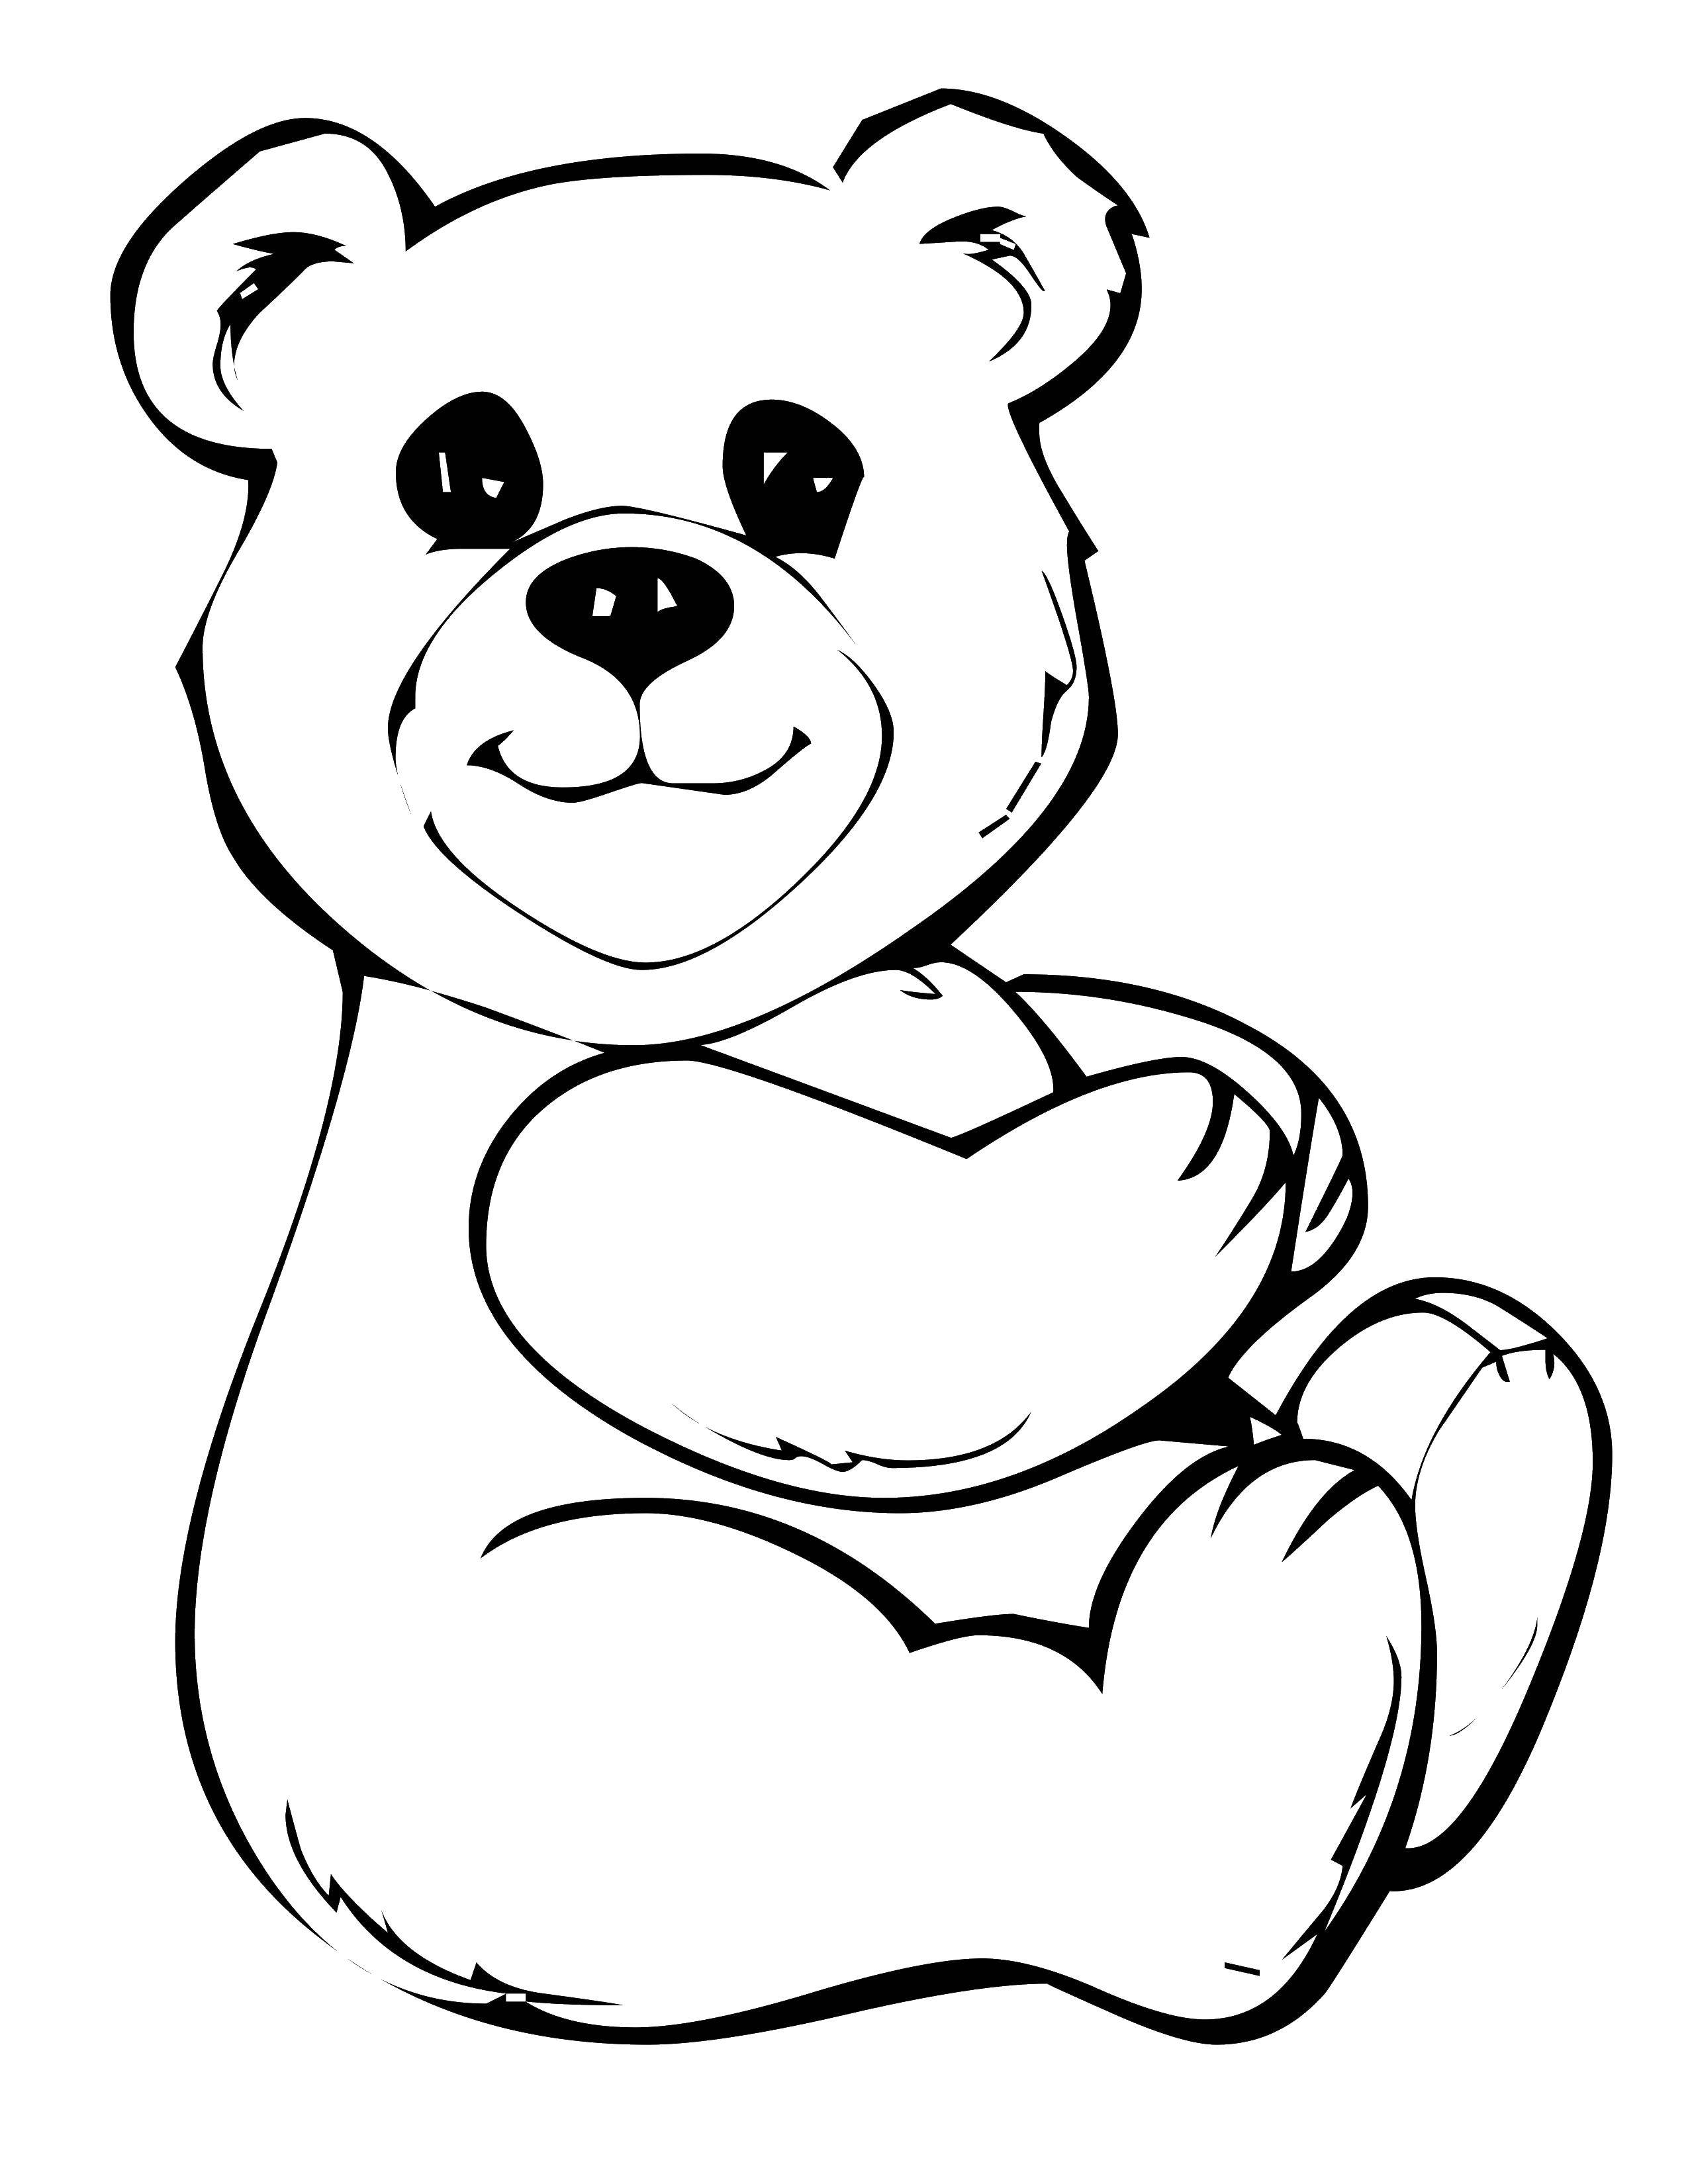 Coloring Cute toy. Category toy. Tags:  Toy, bear.